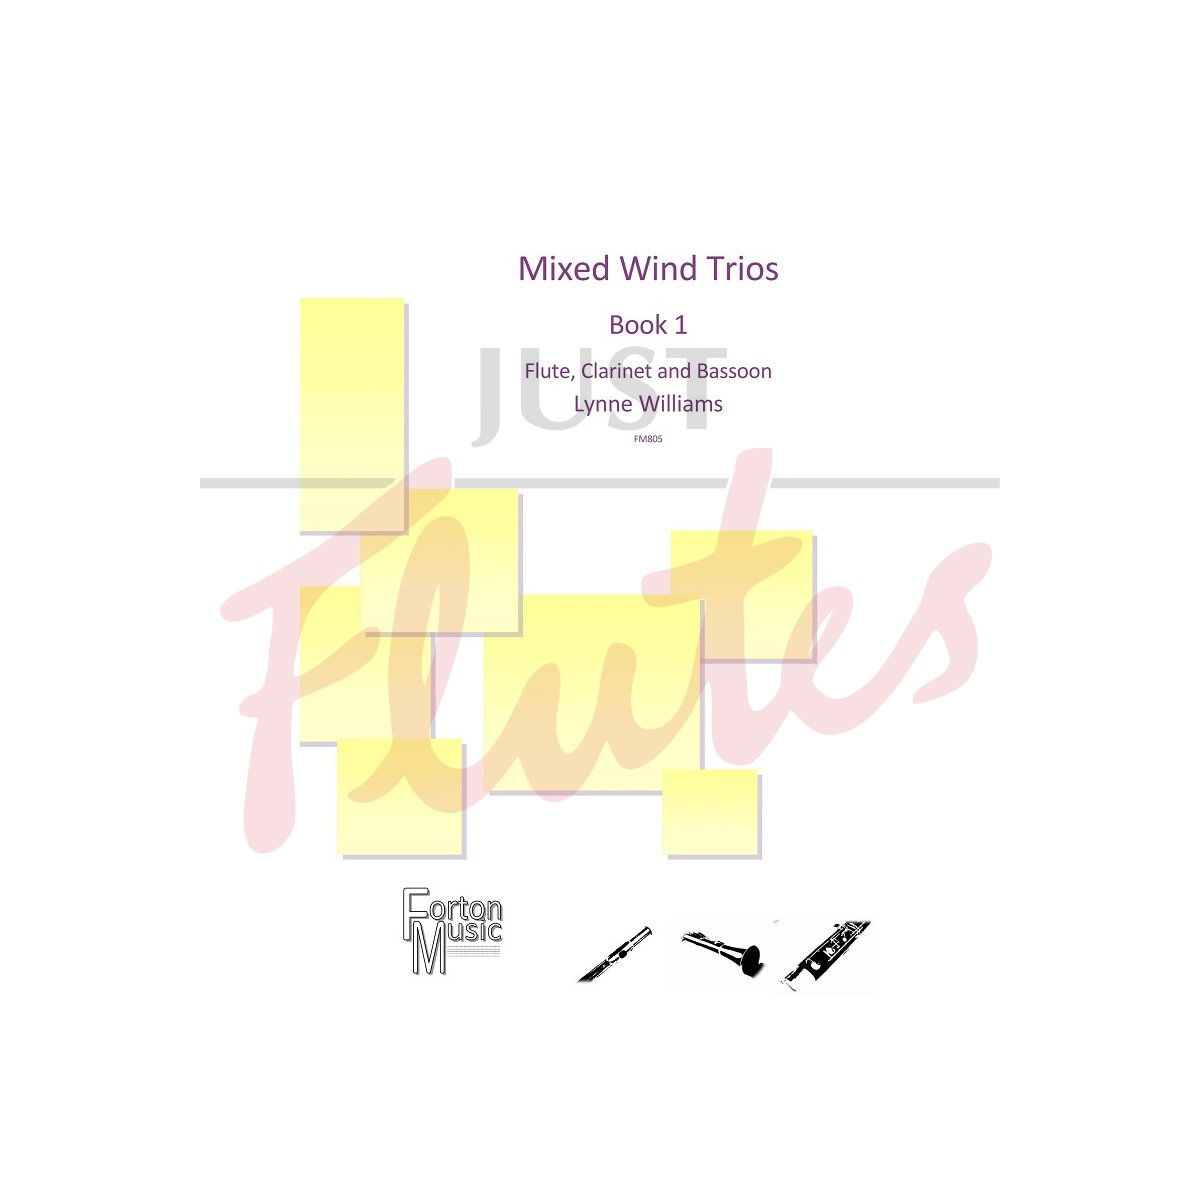 Mixed Wind Trios for Flute, Clarinet and Bassoon Book 1